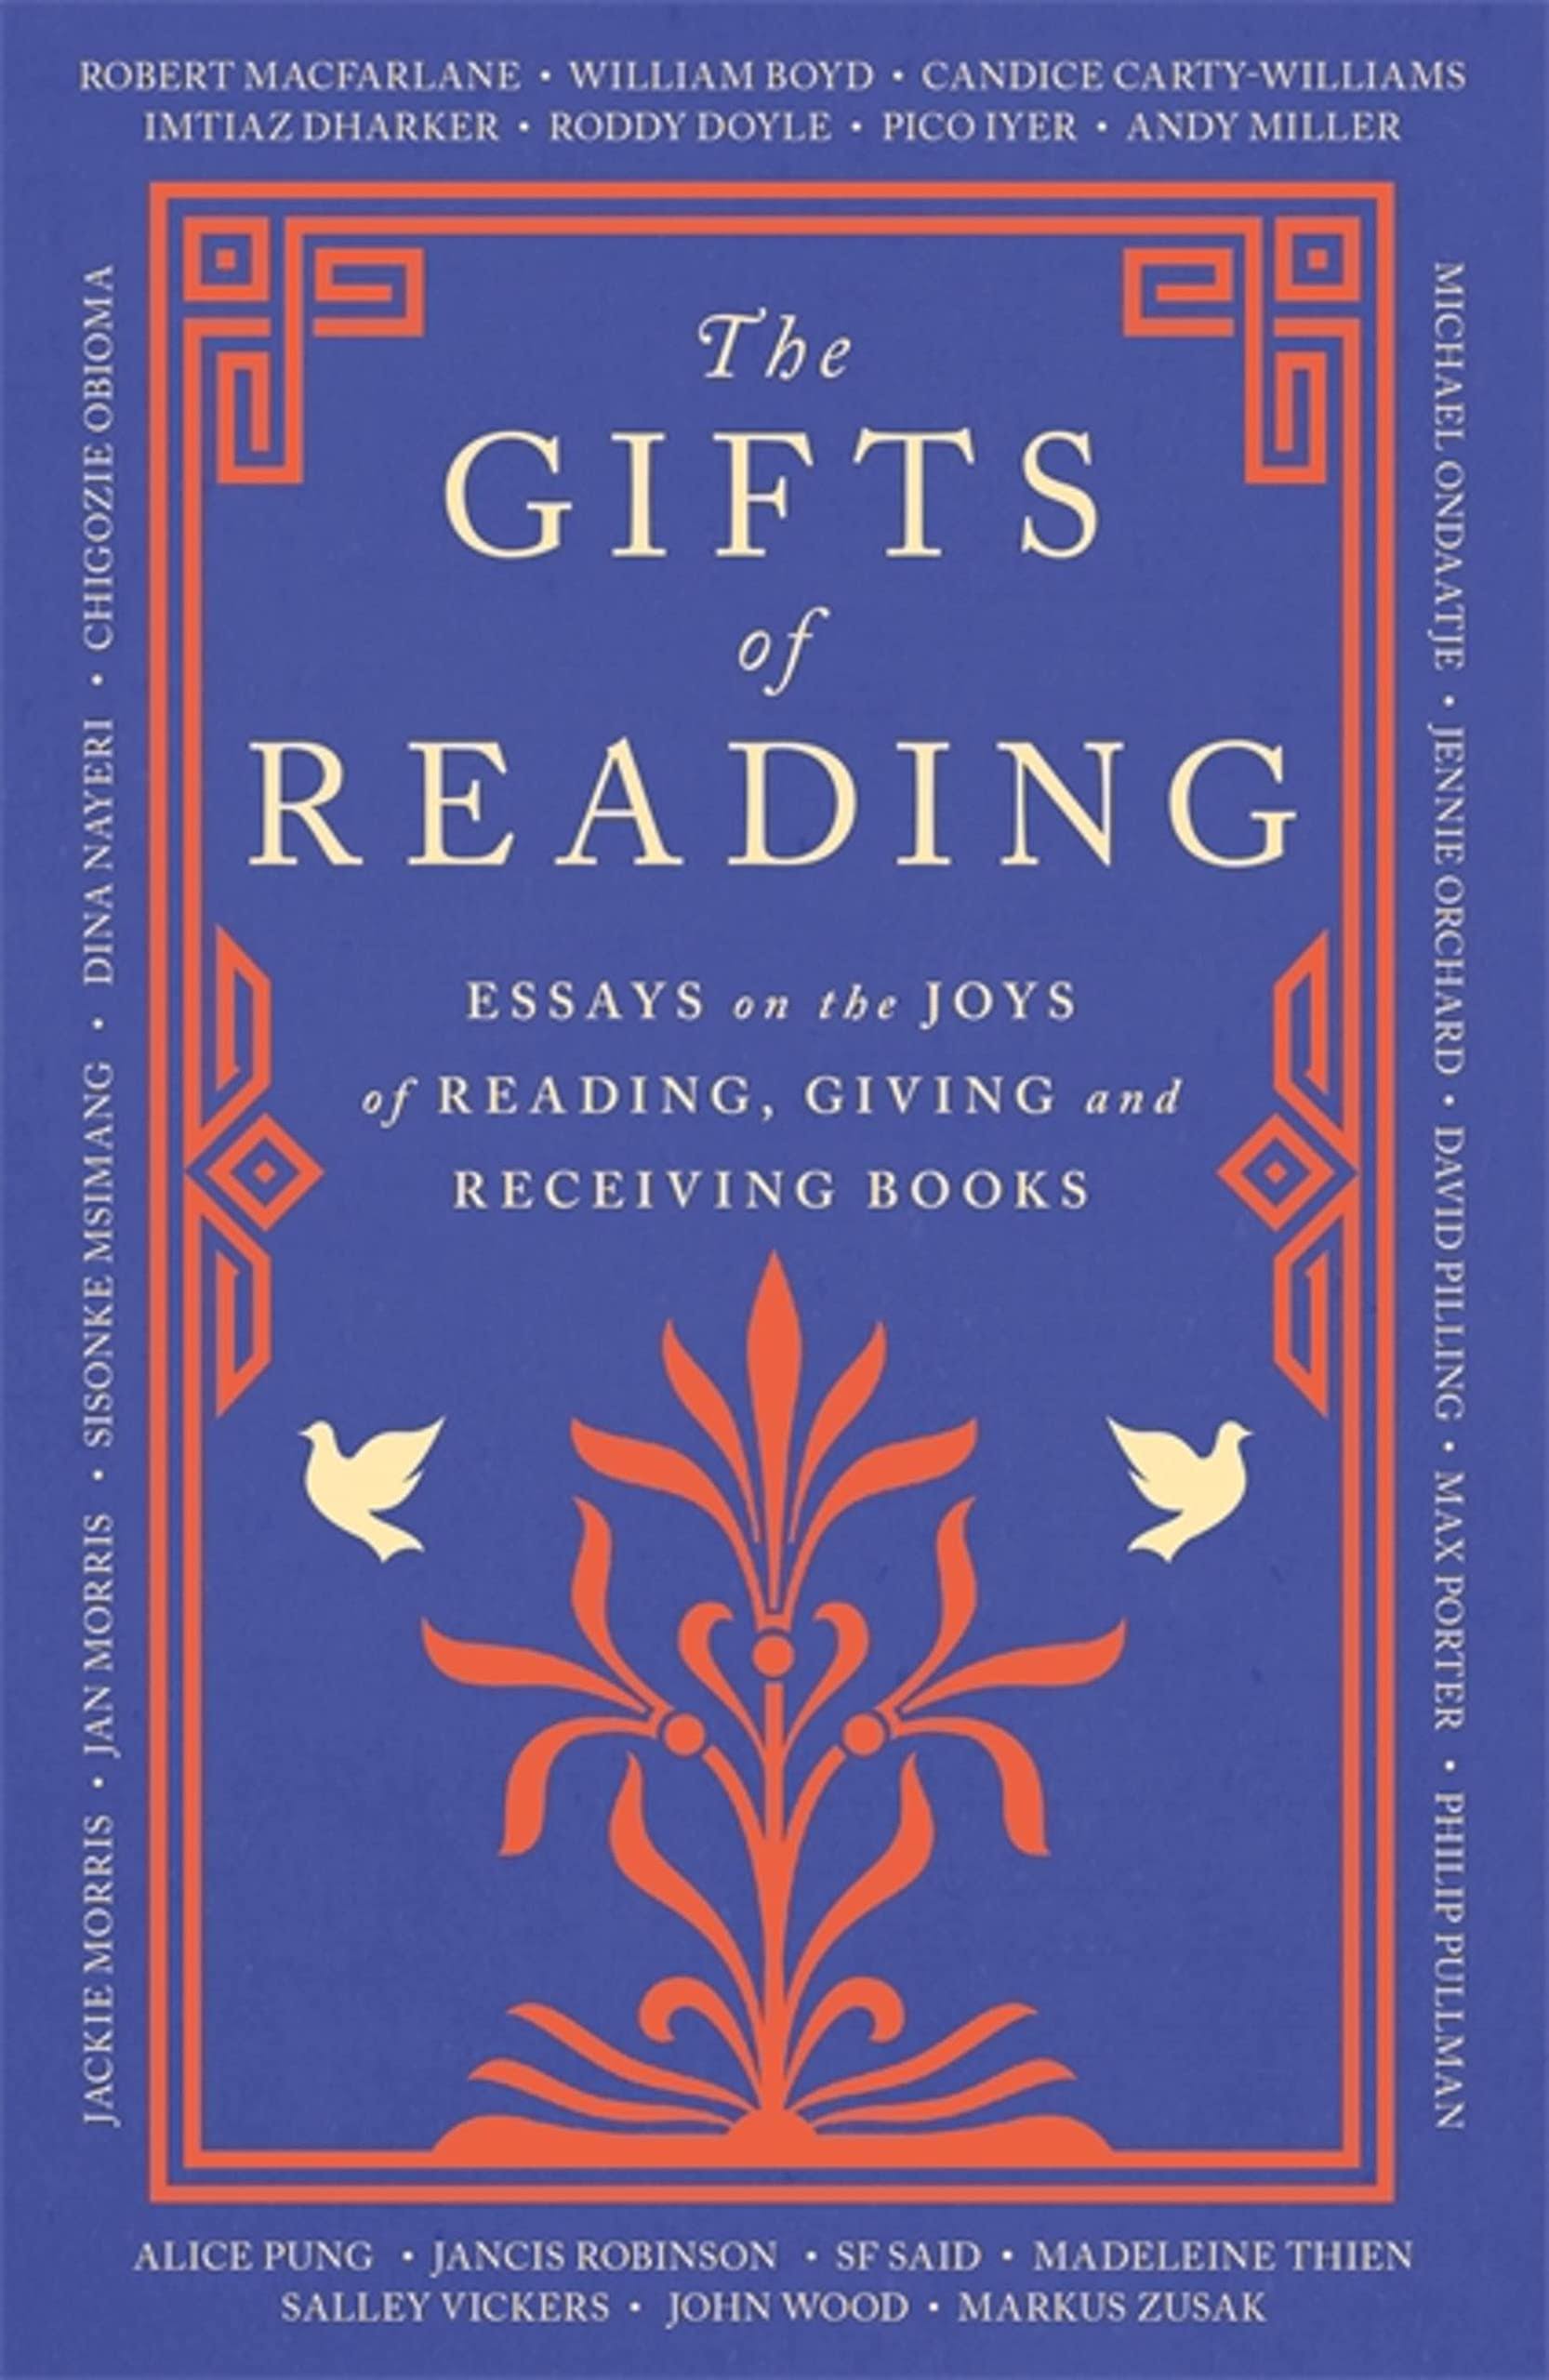 The Gifts of Reading [Book]